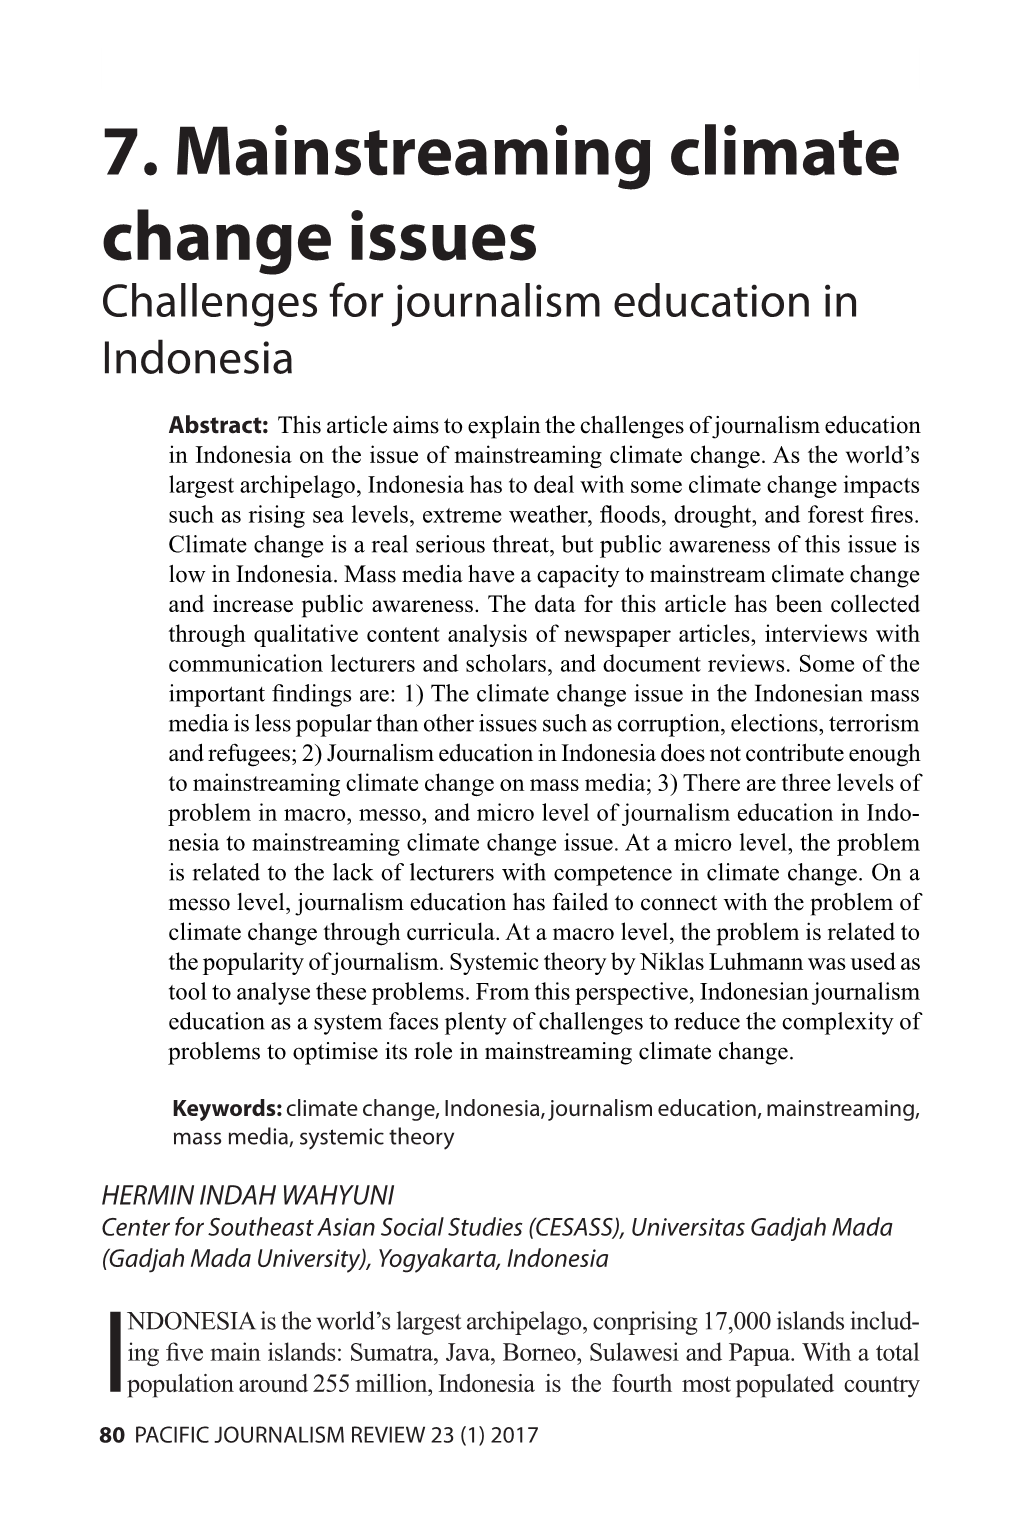 7. Mainstreaming Climate Change Issues Challenges for Journalism Education in Indonesia